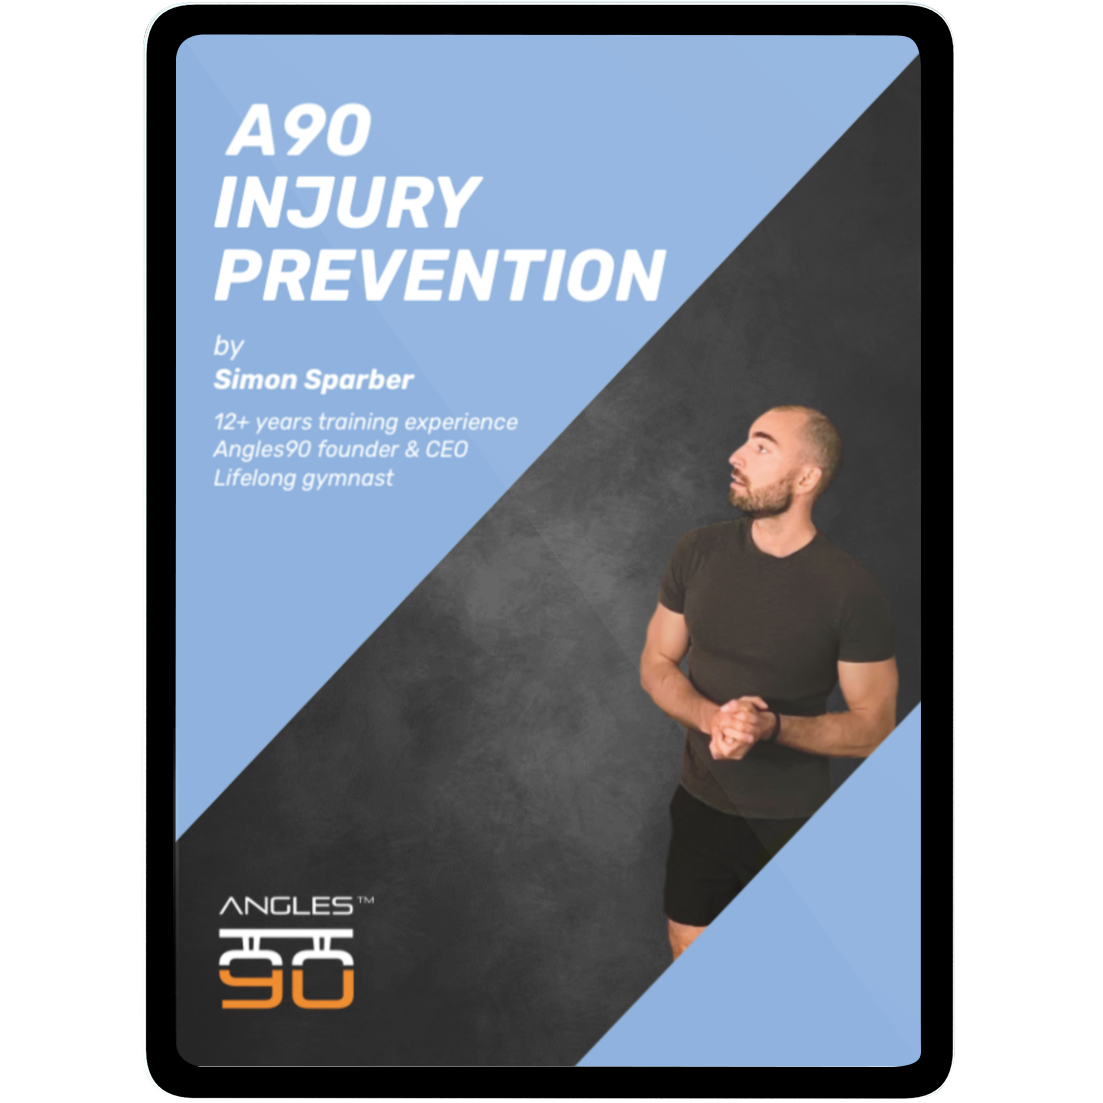 A fitness professional stands confidently next to text offering insights into 'A90 Injury Prevention (eBook & Video Material)', highlighting his 12 years of training experience, expertise as a lifelong gymnast, and CEO of a series of how